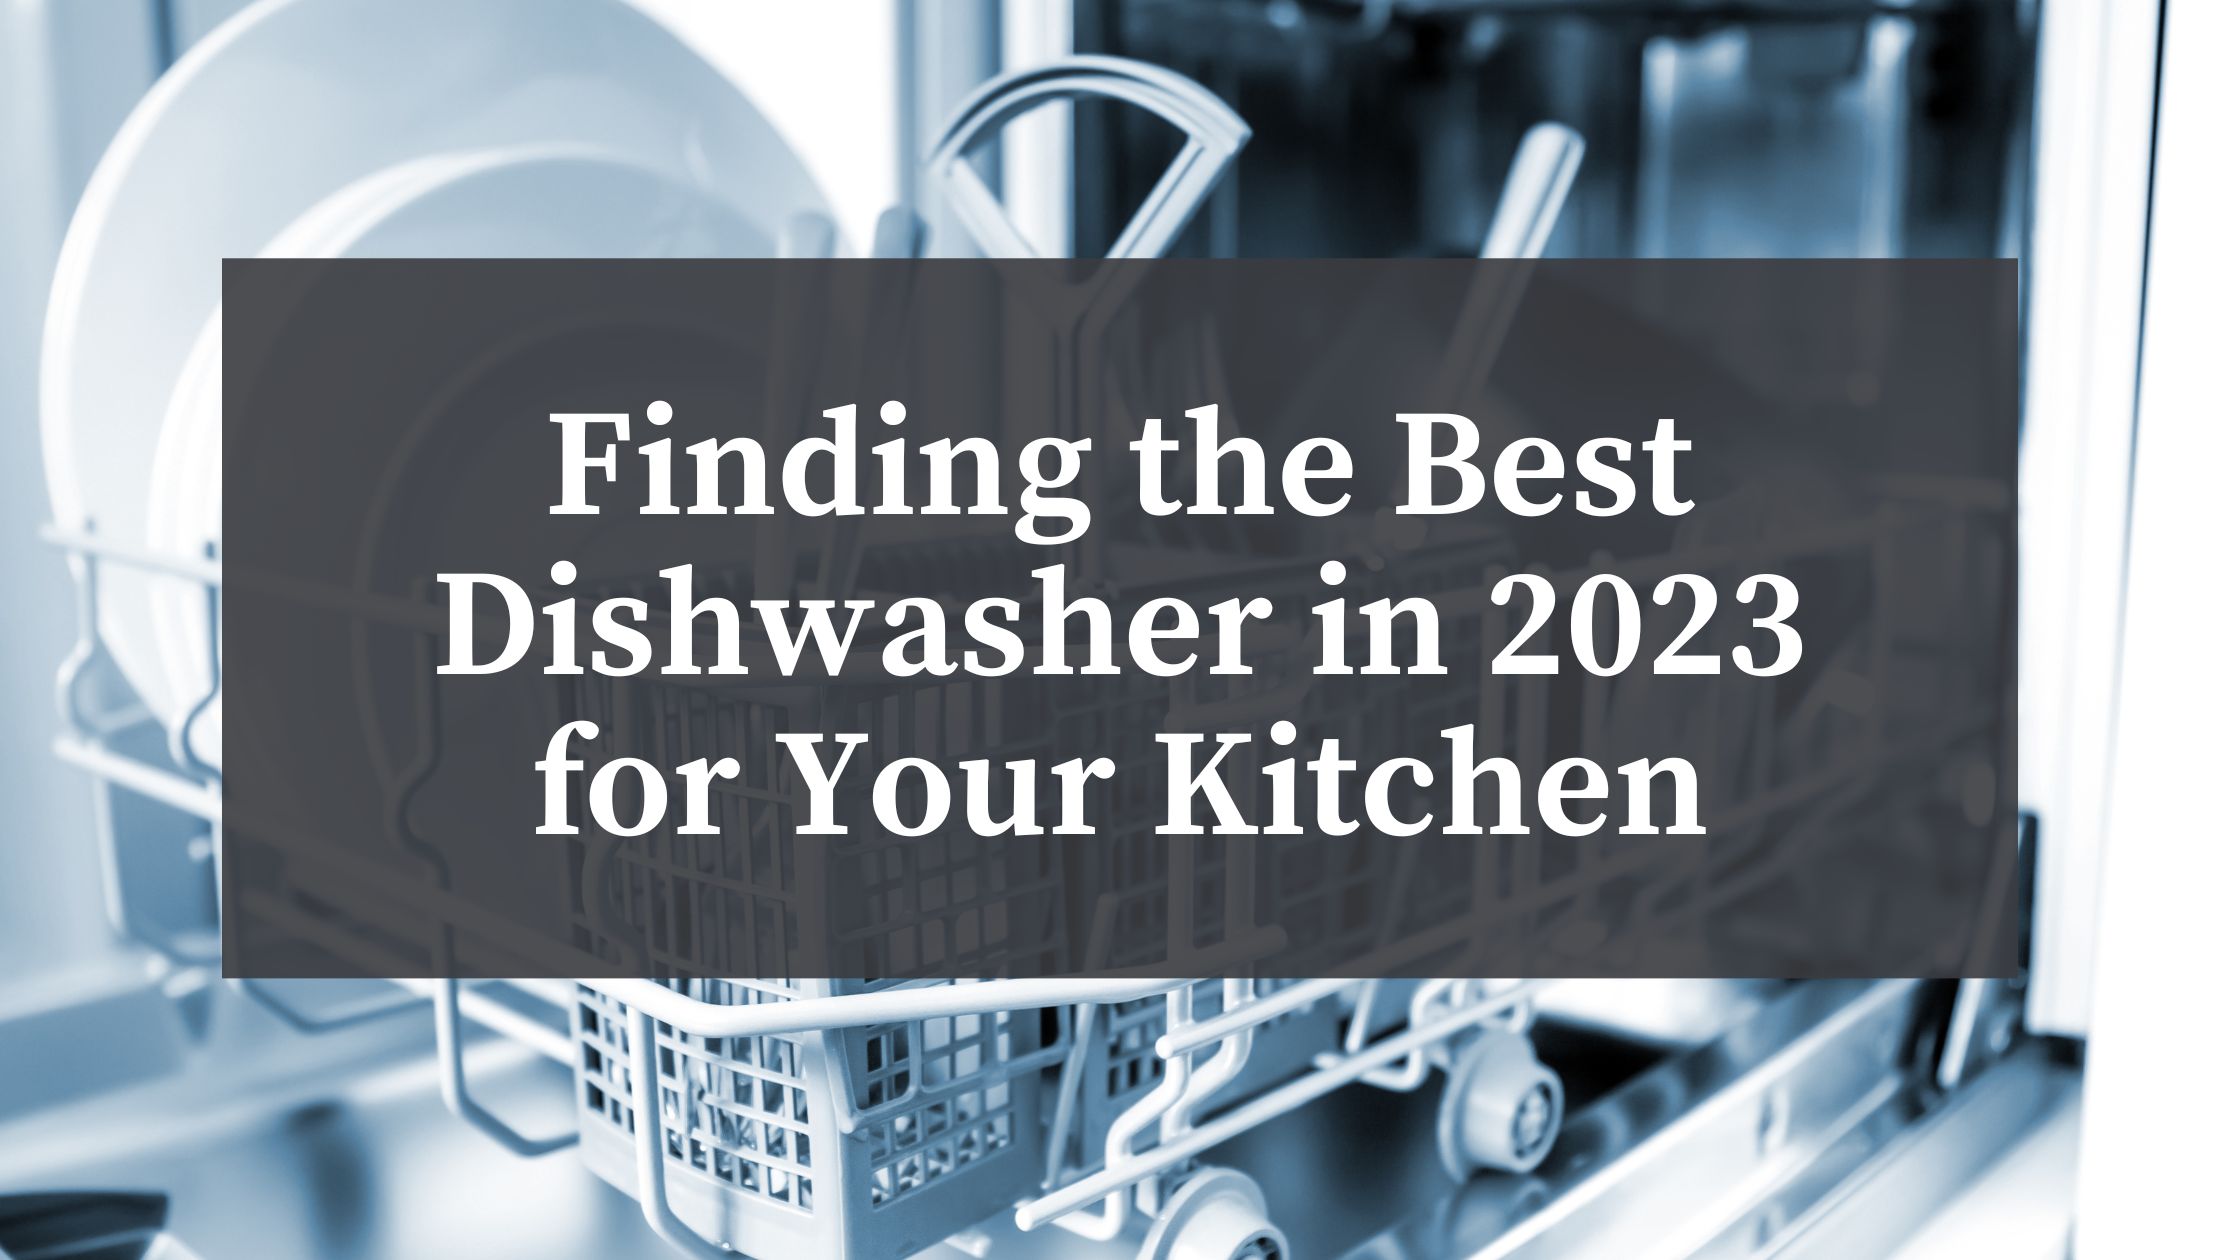 best dishwasher in 2023 loaded with dishes in home kitchen with door open